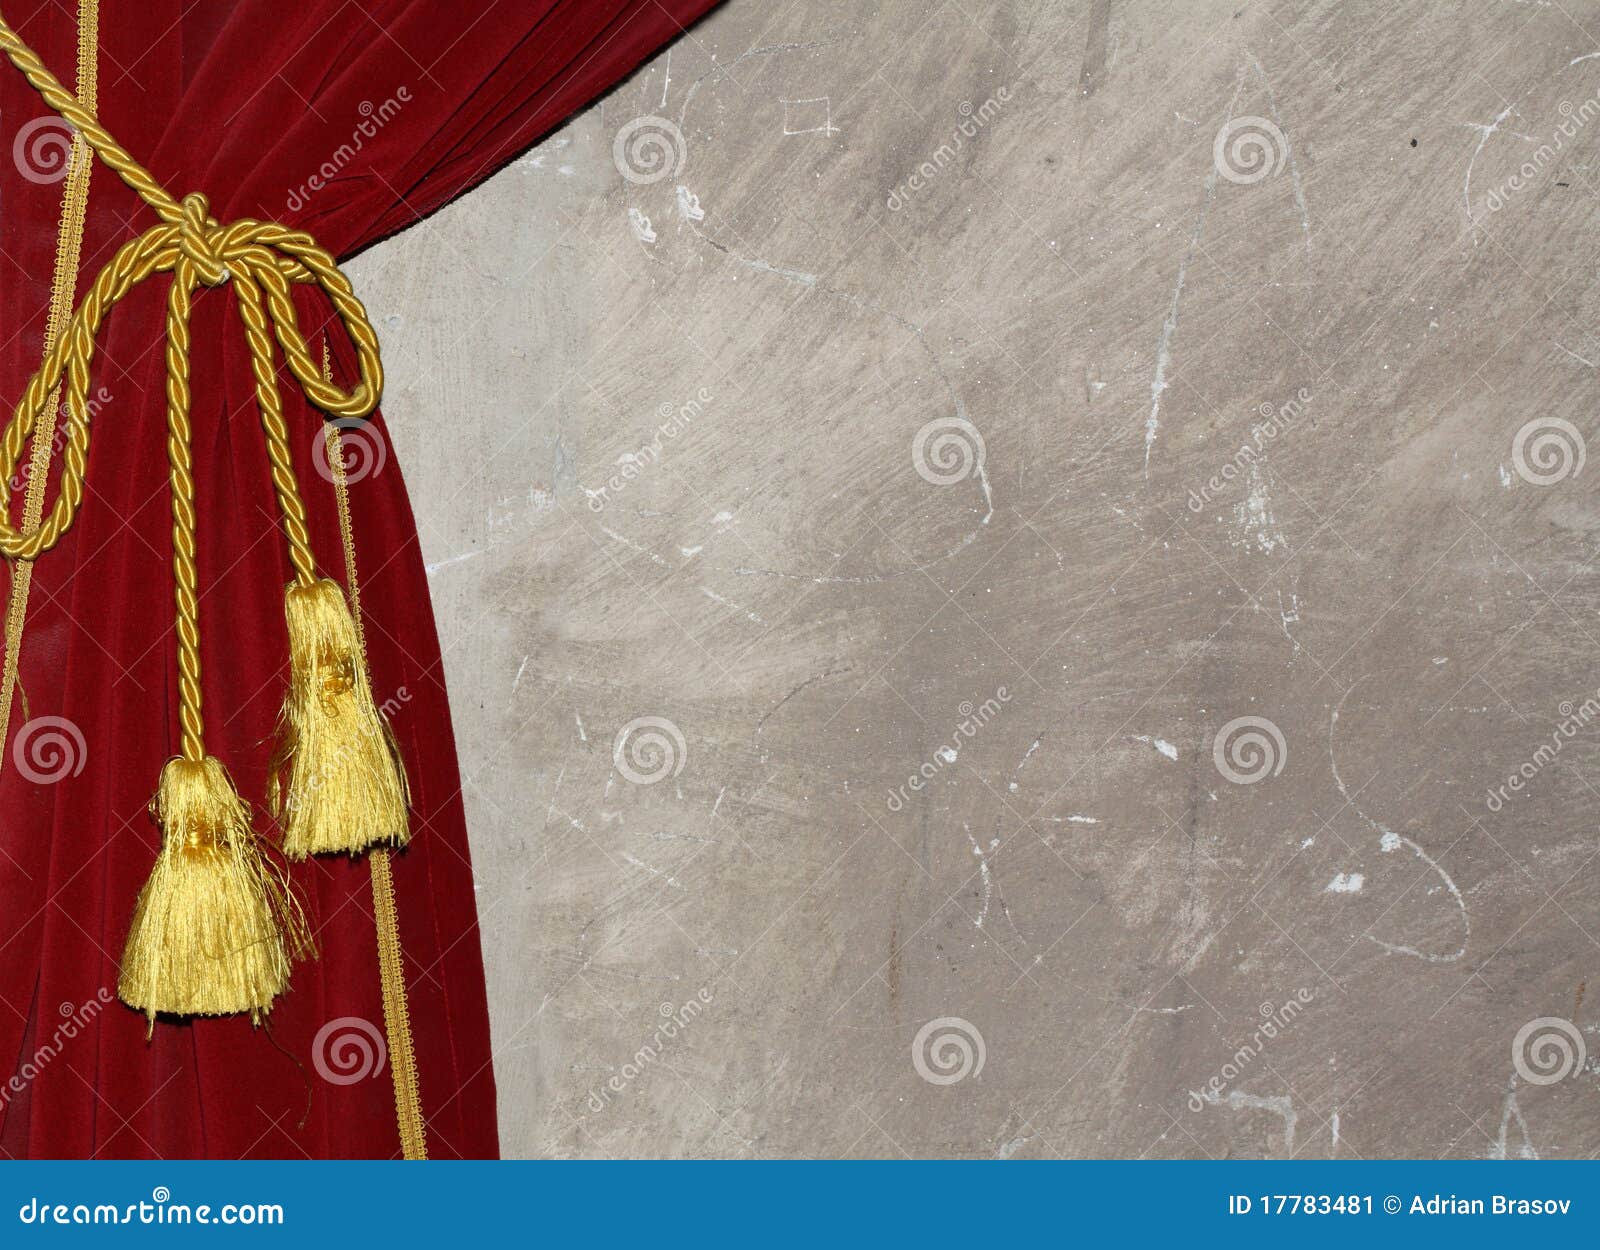 red curtain with knot and tassel